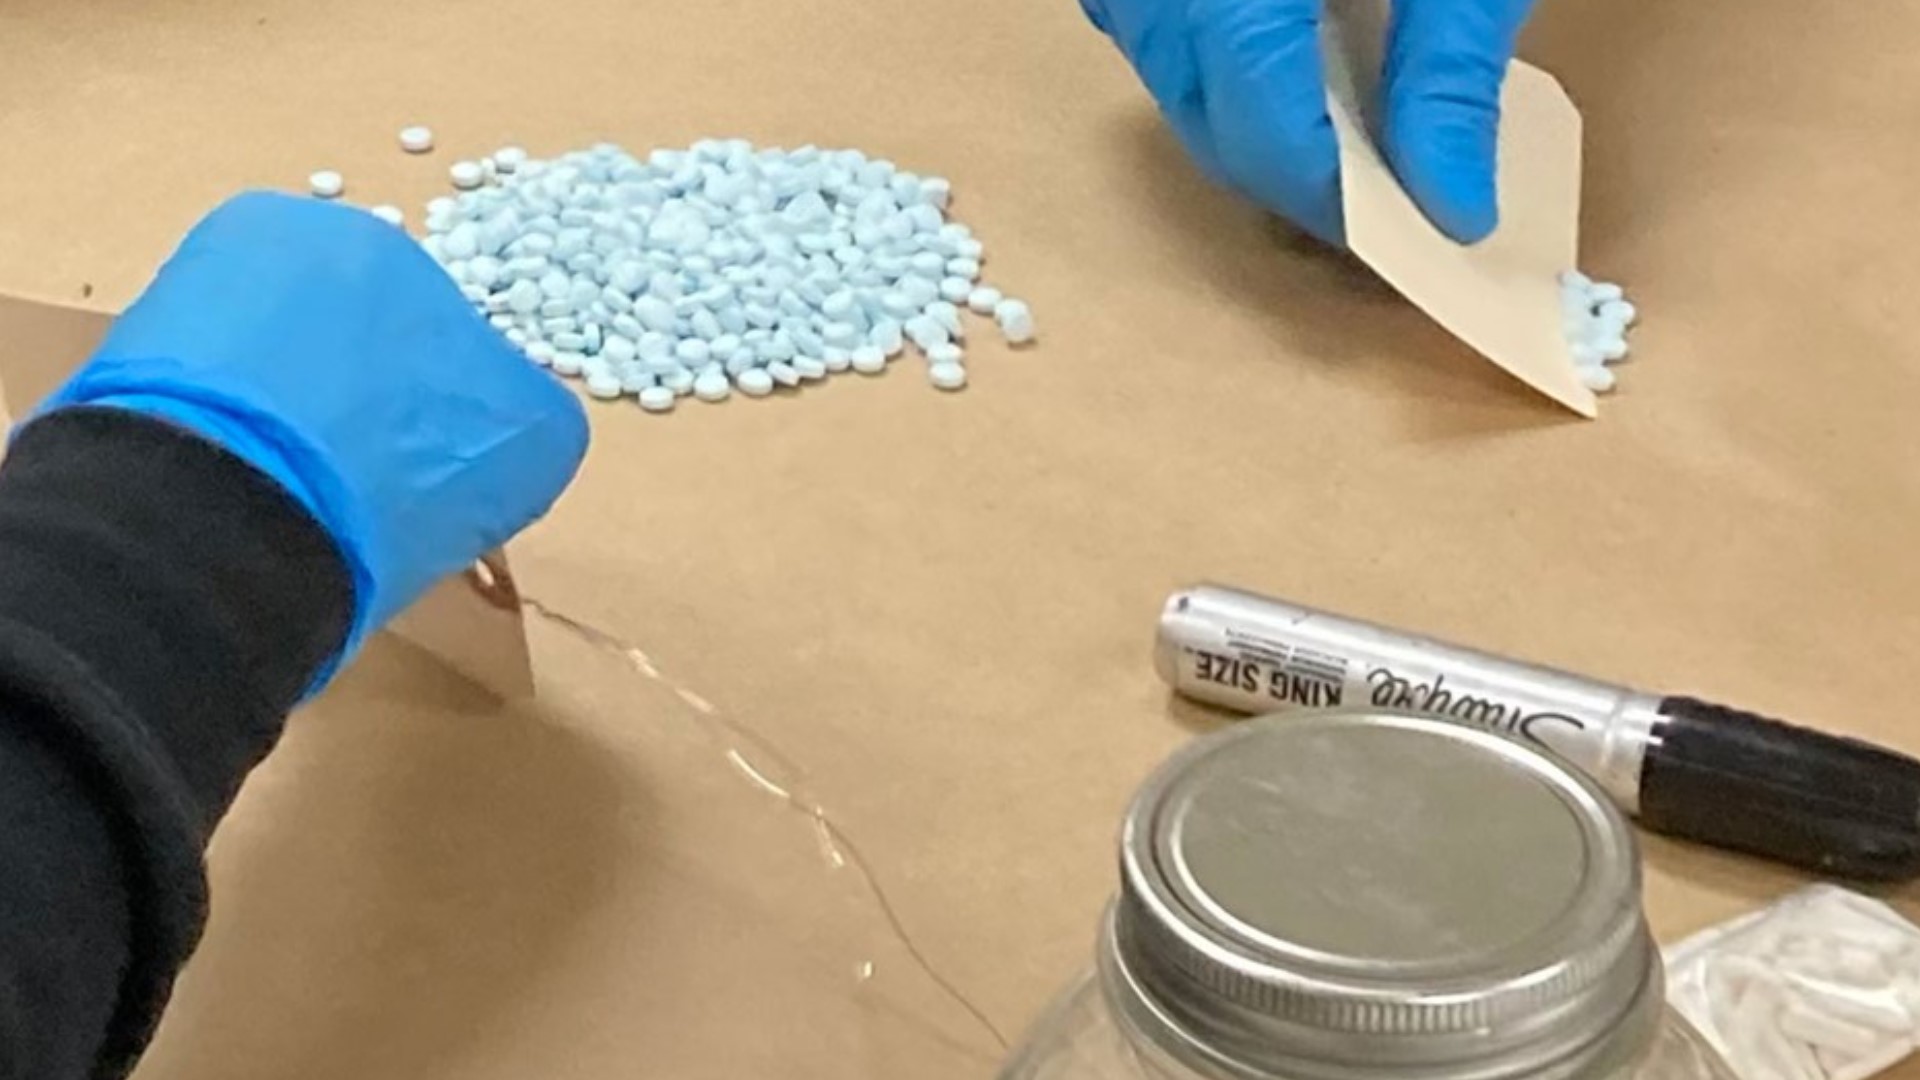 The number of fake pills containing fentanyl in Washington County has shot up exponentially, officials believe it is because the compounds are more readily available